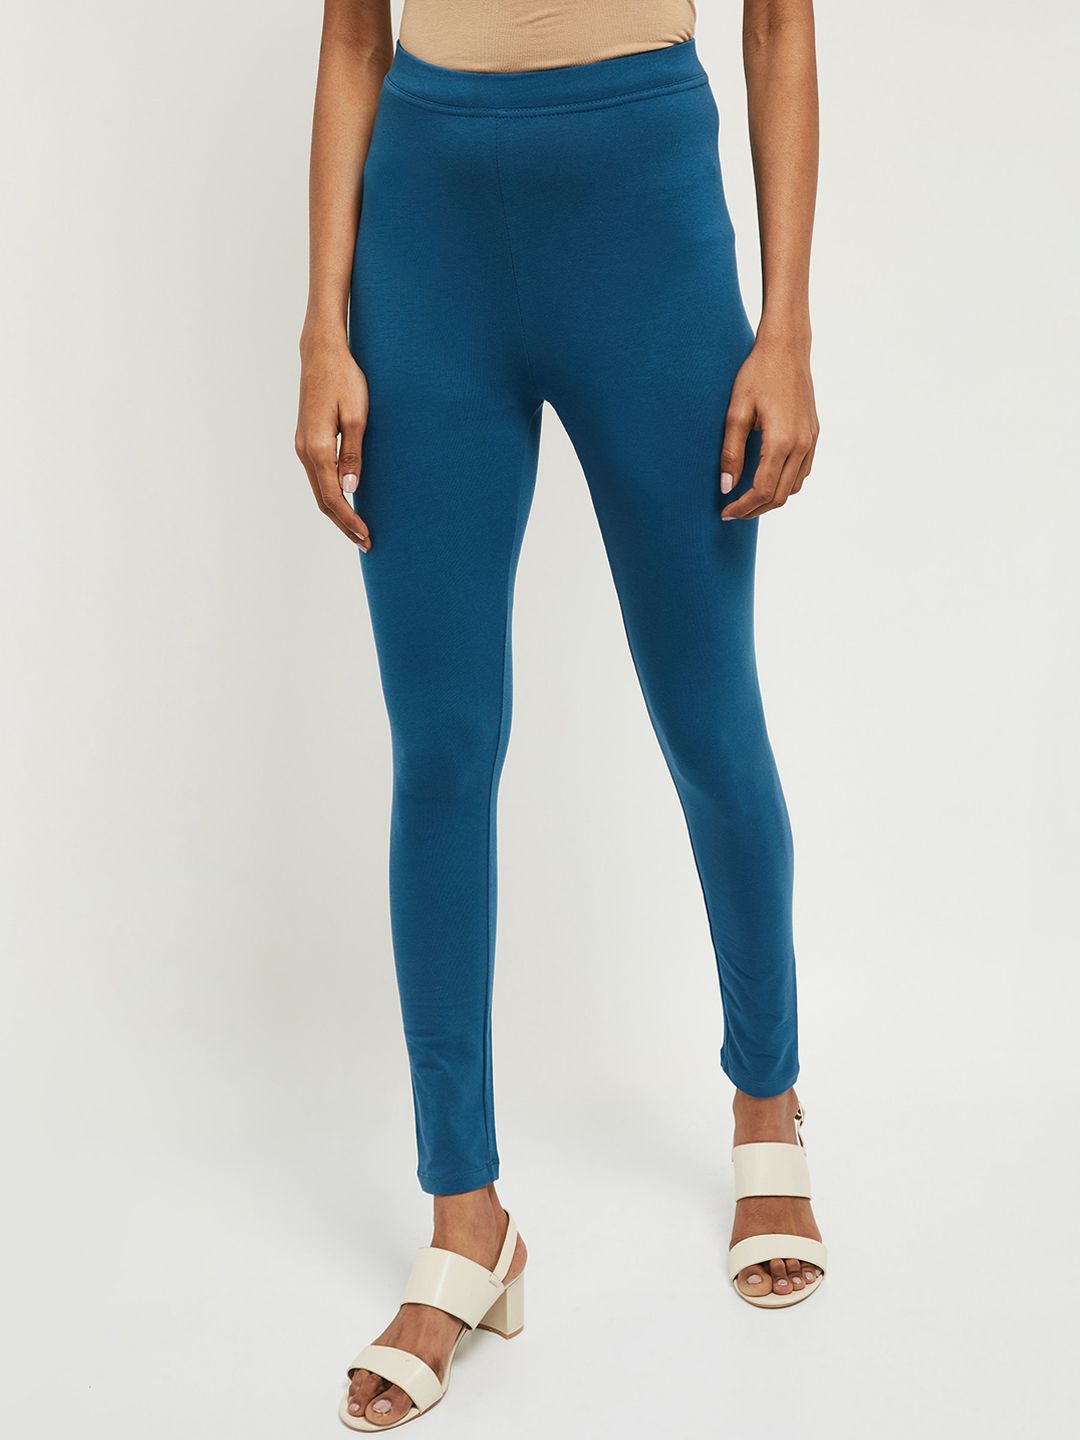 max Women Blue Solid Ankle-Length Leggings Price in India